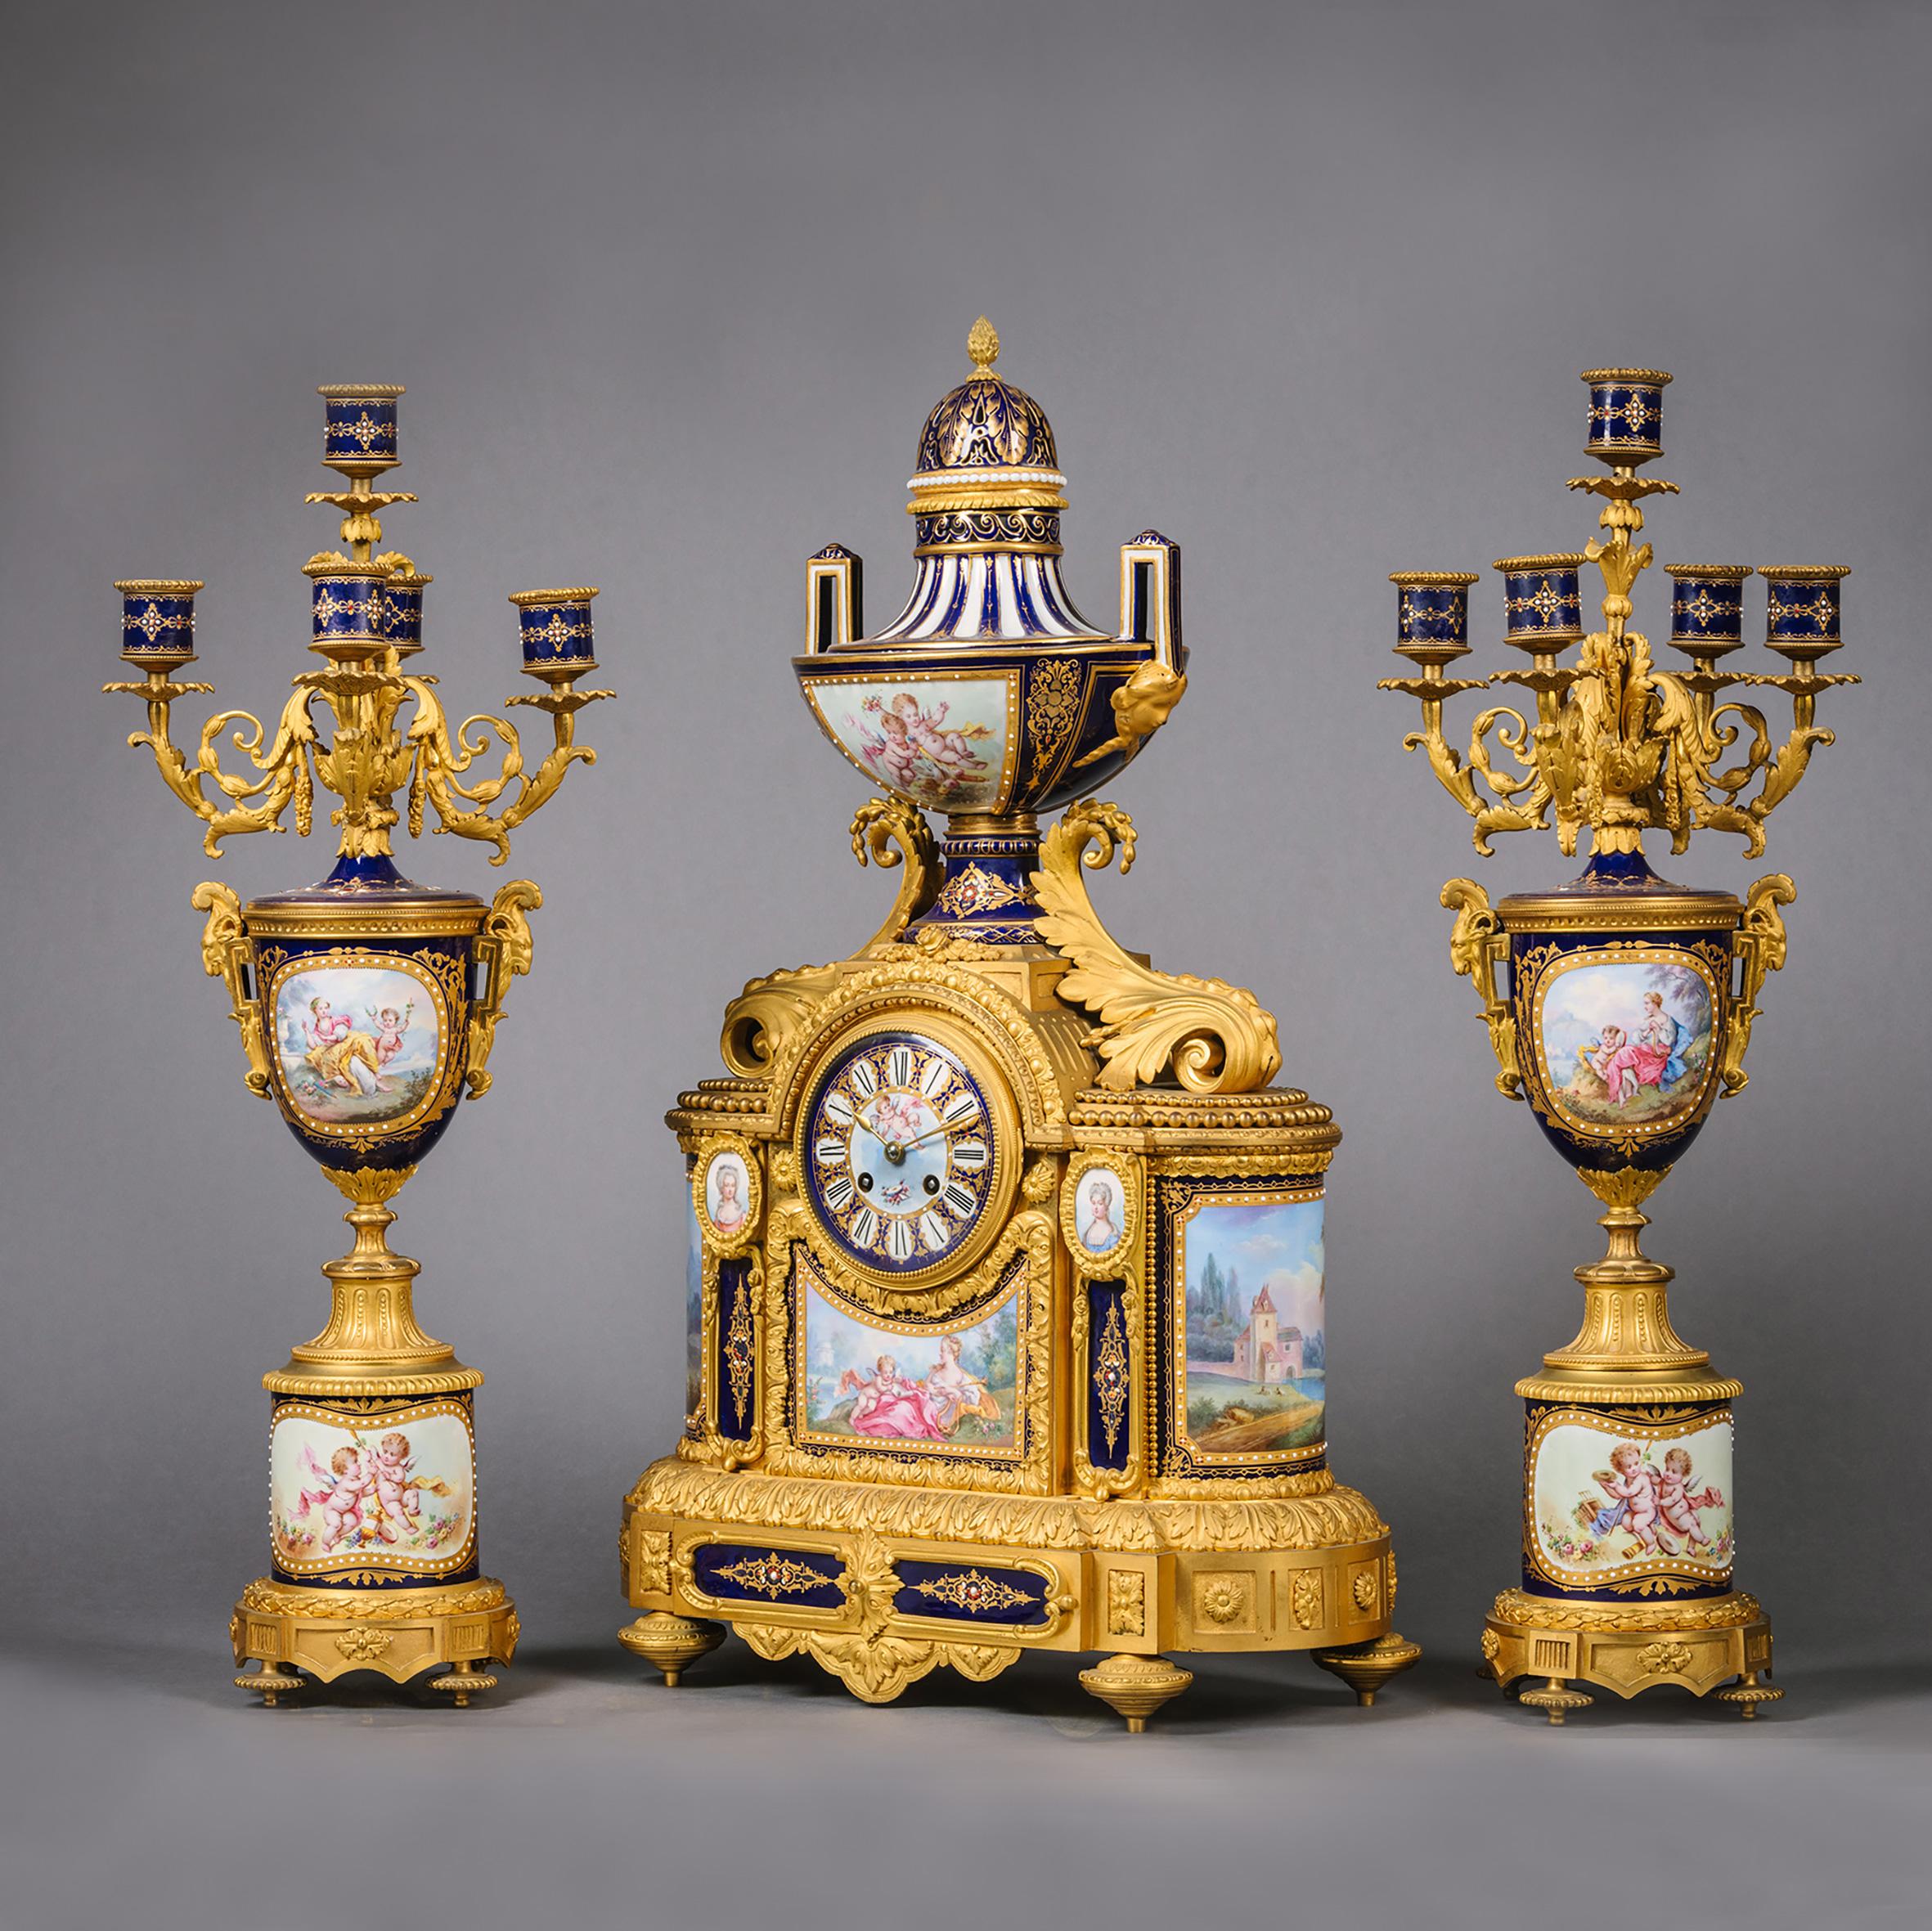 A fine Napoléon III gilt-bronze and sèvres style cobalt blue ground 'Jewelled' Porcelain Three-Piece Clock Garniture

Comprising a mantel clock and a pair of five-light vase candelabra.

The clock surmounted by an urn fine painted with putti and